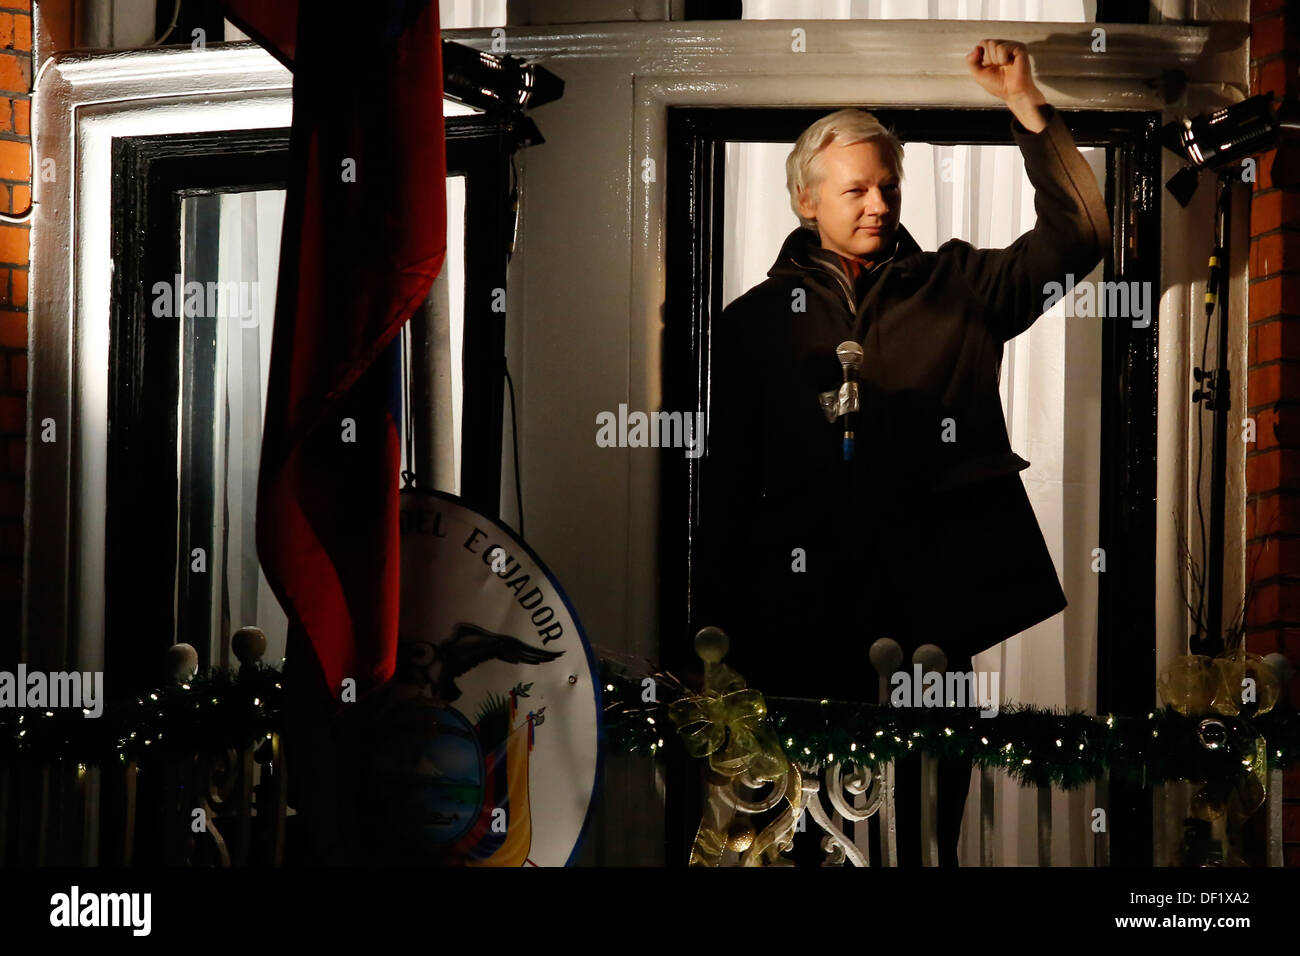 WikiLeaks founder Julian Assange delivers a speech from a balcony of the Ecuadorean embassy Stock Photo